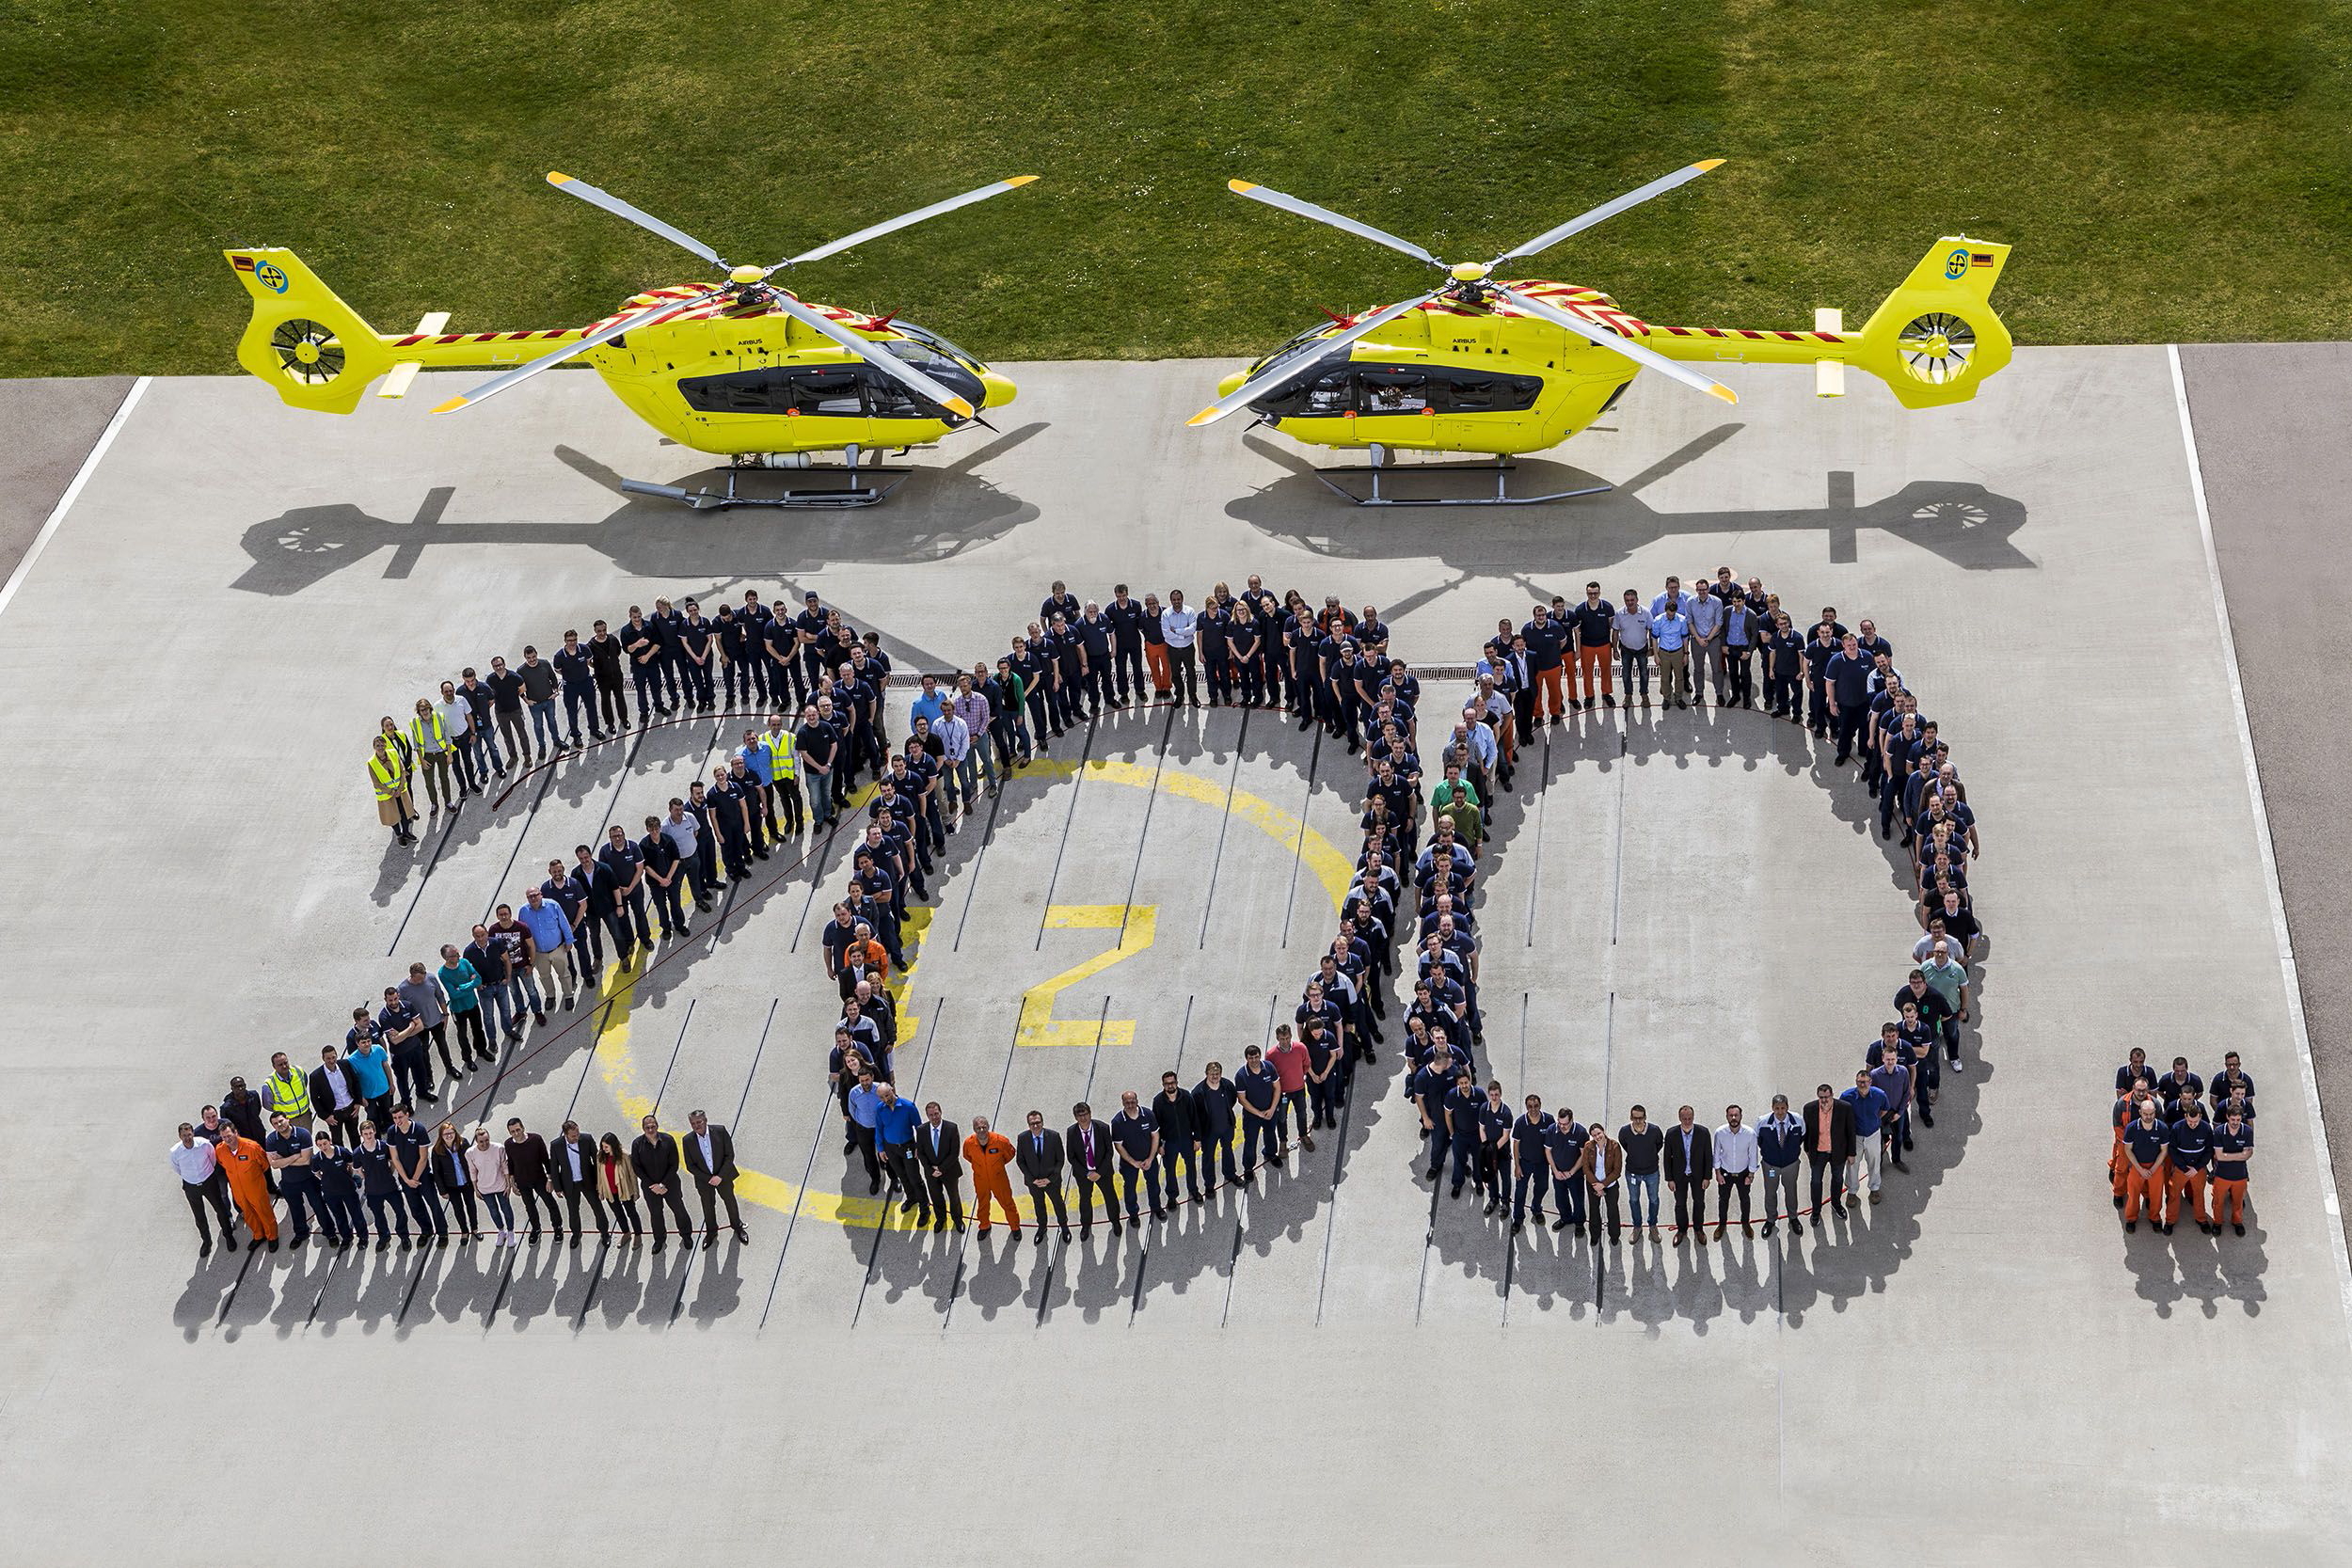 Airbus Helicopters has delivered its 200th H145 helicopter to Norsk Luftambulanse (NOLAS). The Air Rescue Operator will use the helicopter for Helicopter Emergency Medical Services (HEMS) in Norway. Click to enlarge.